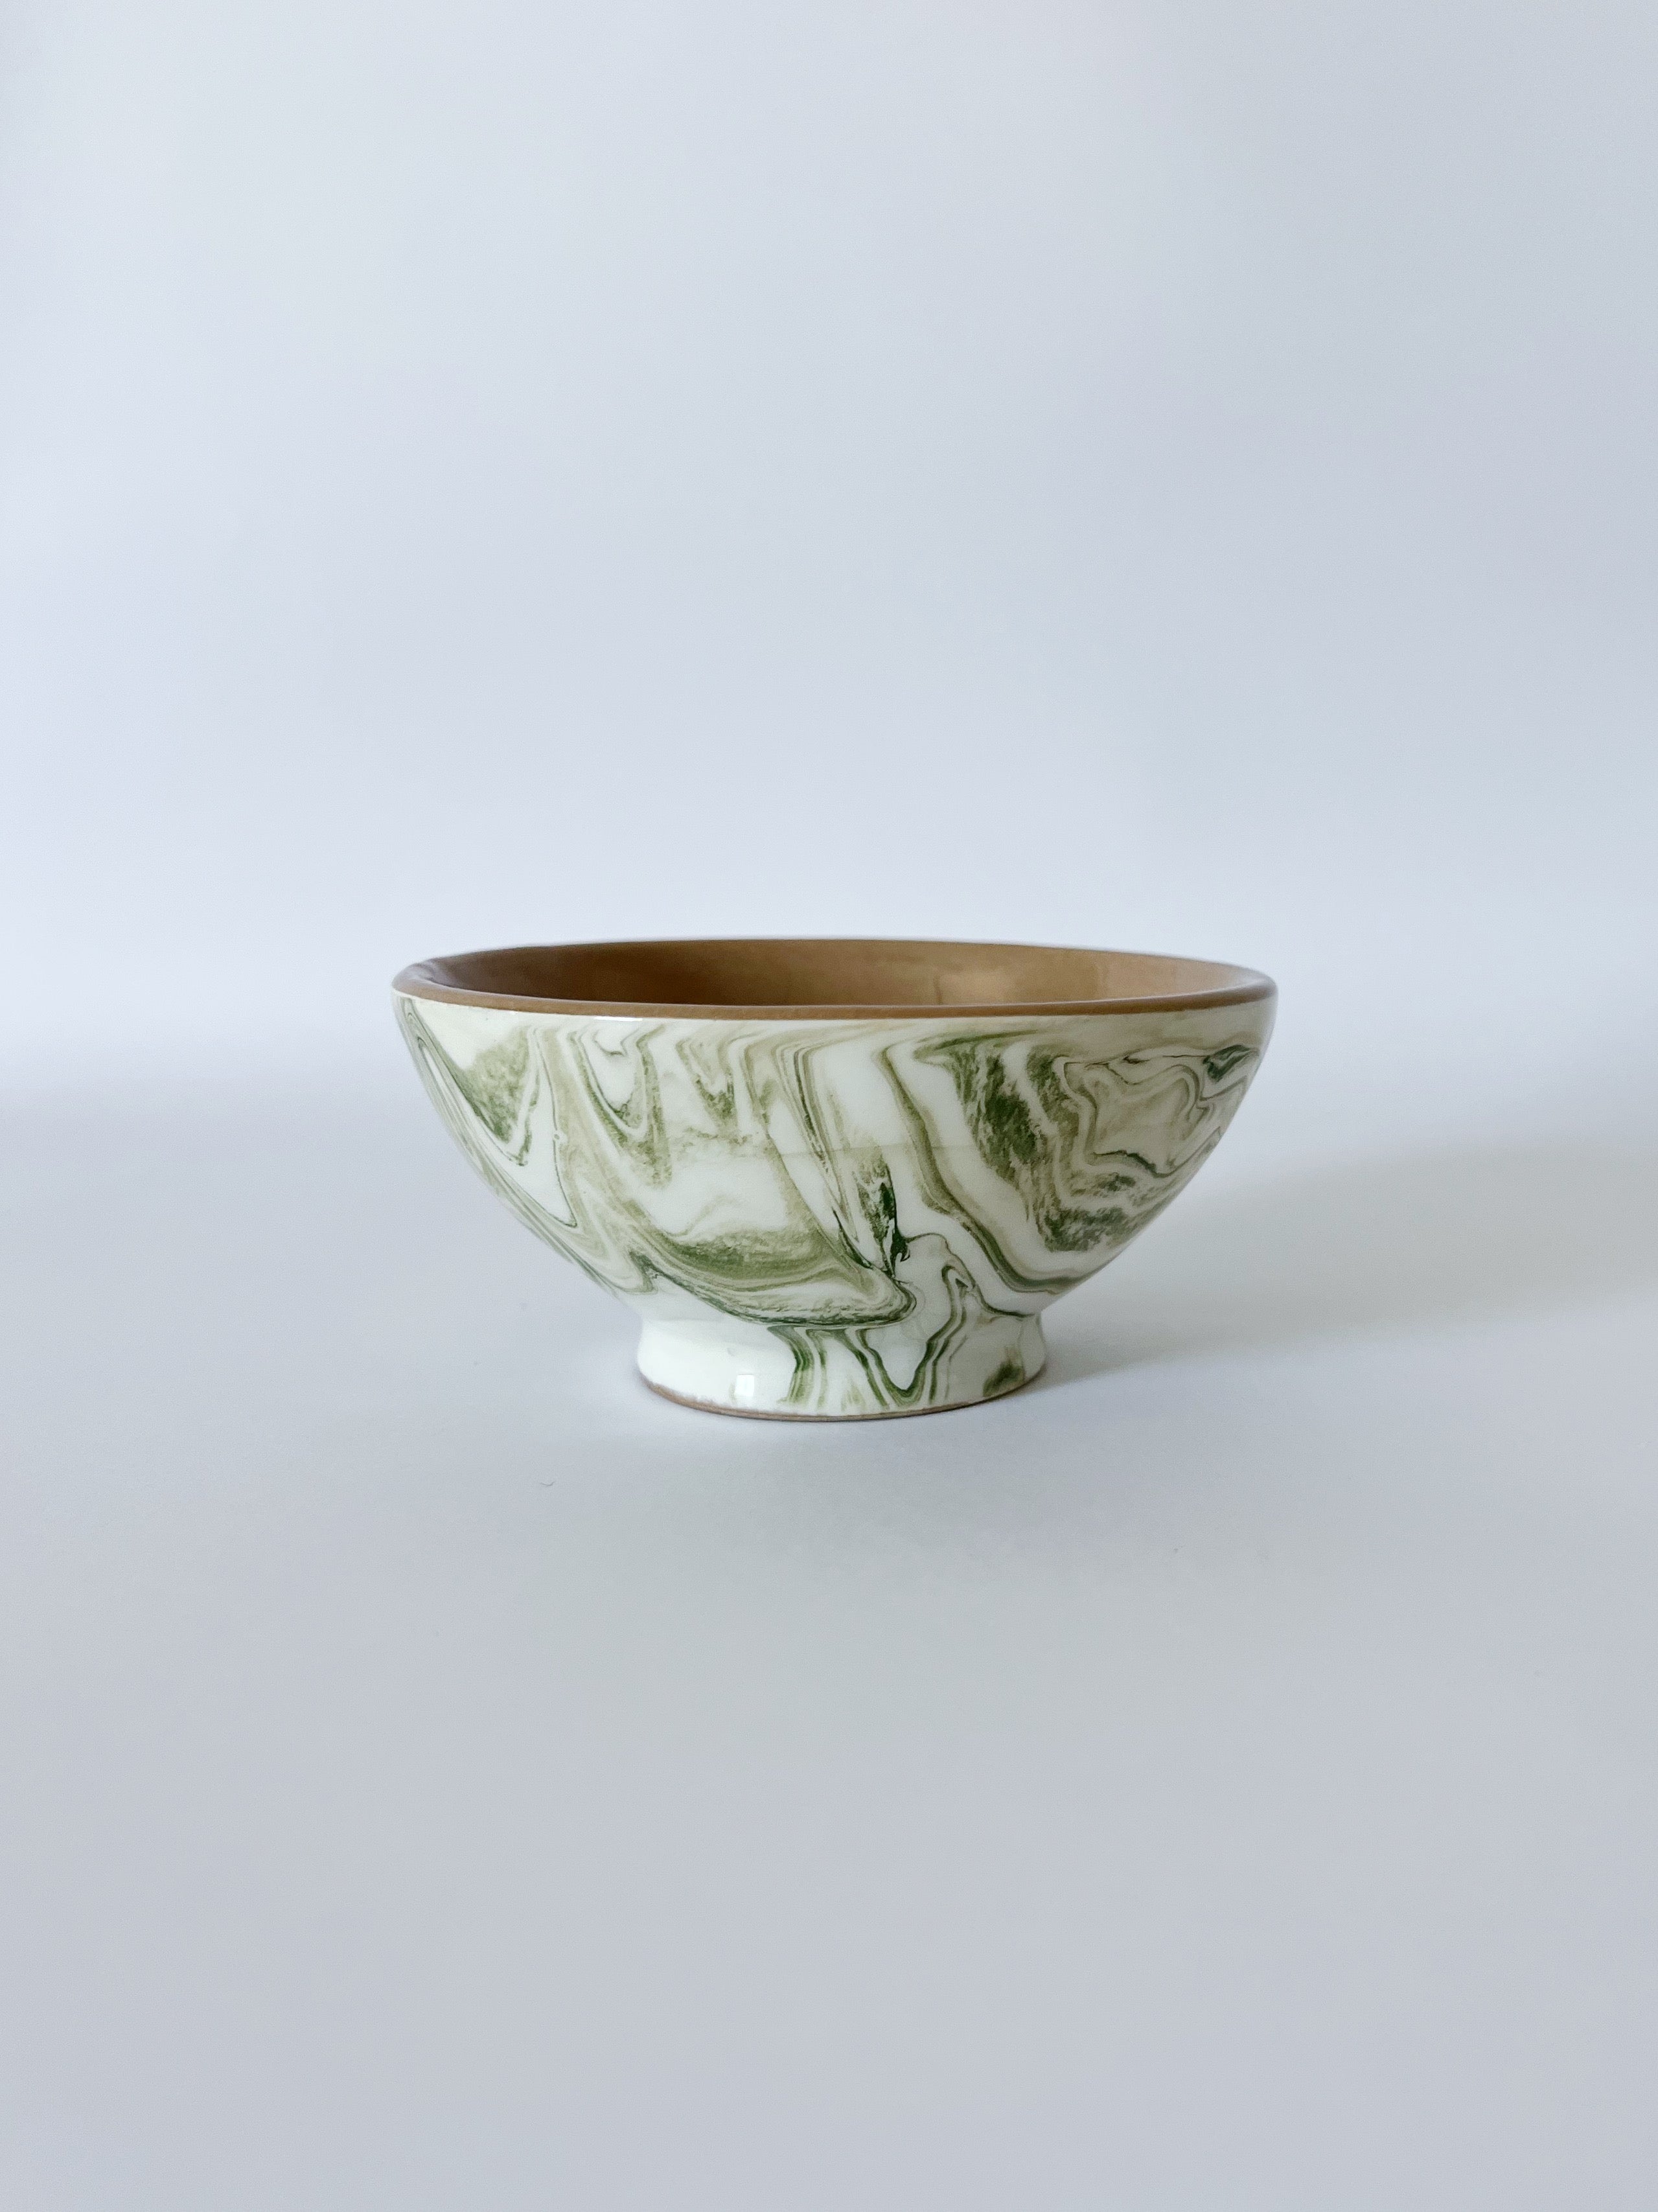 Une Vie Nomade Small Swirled Bowls—Green Une Vie Nomade new arrivals 2023 2CFB37C2-E575-49B5-A086-38DEFEE6AC86